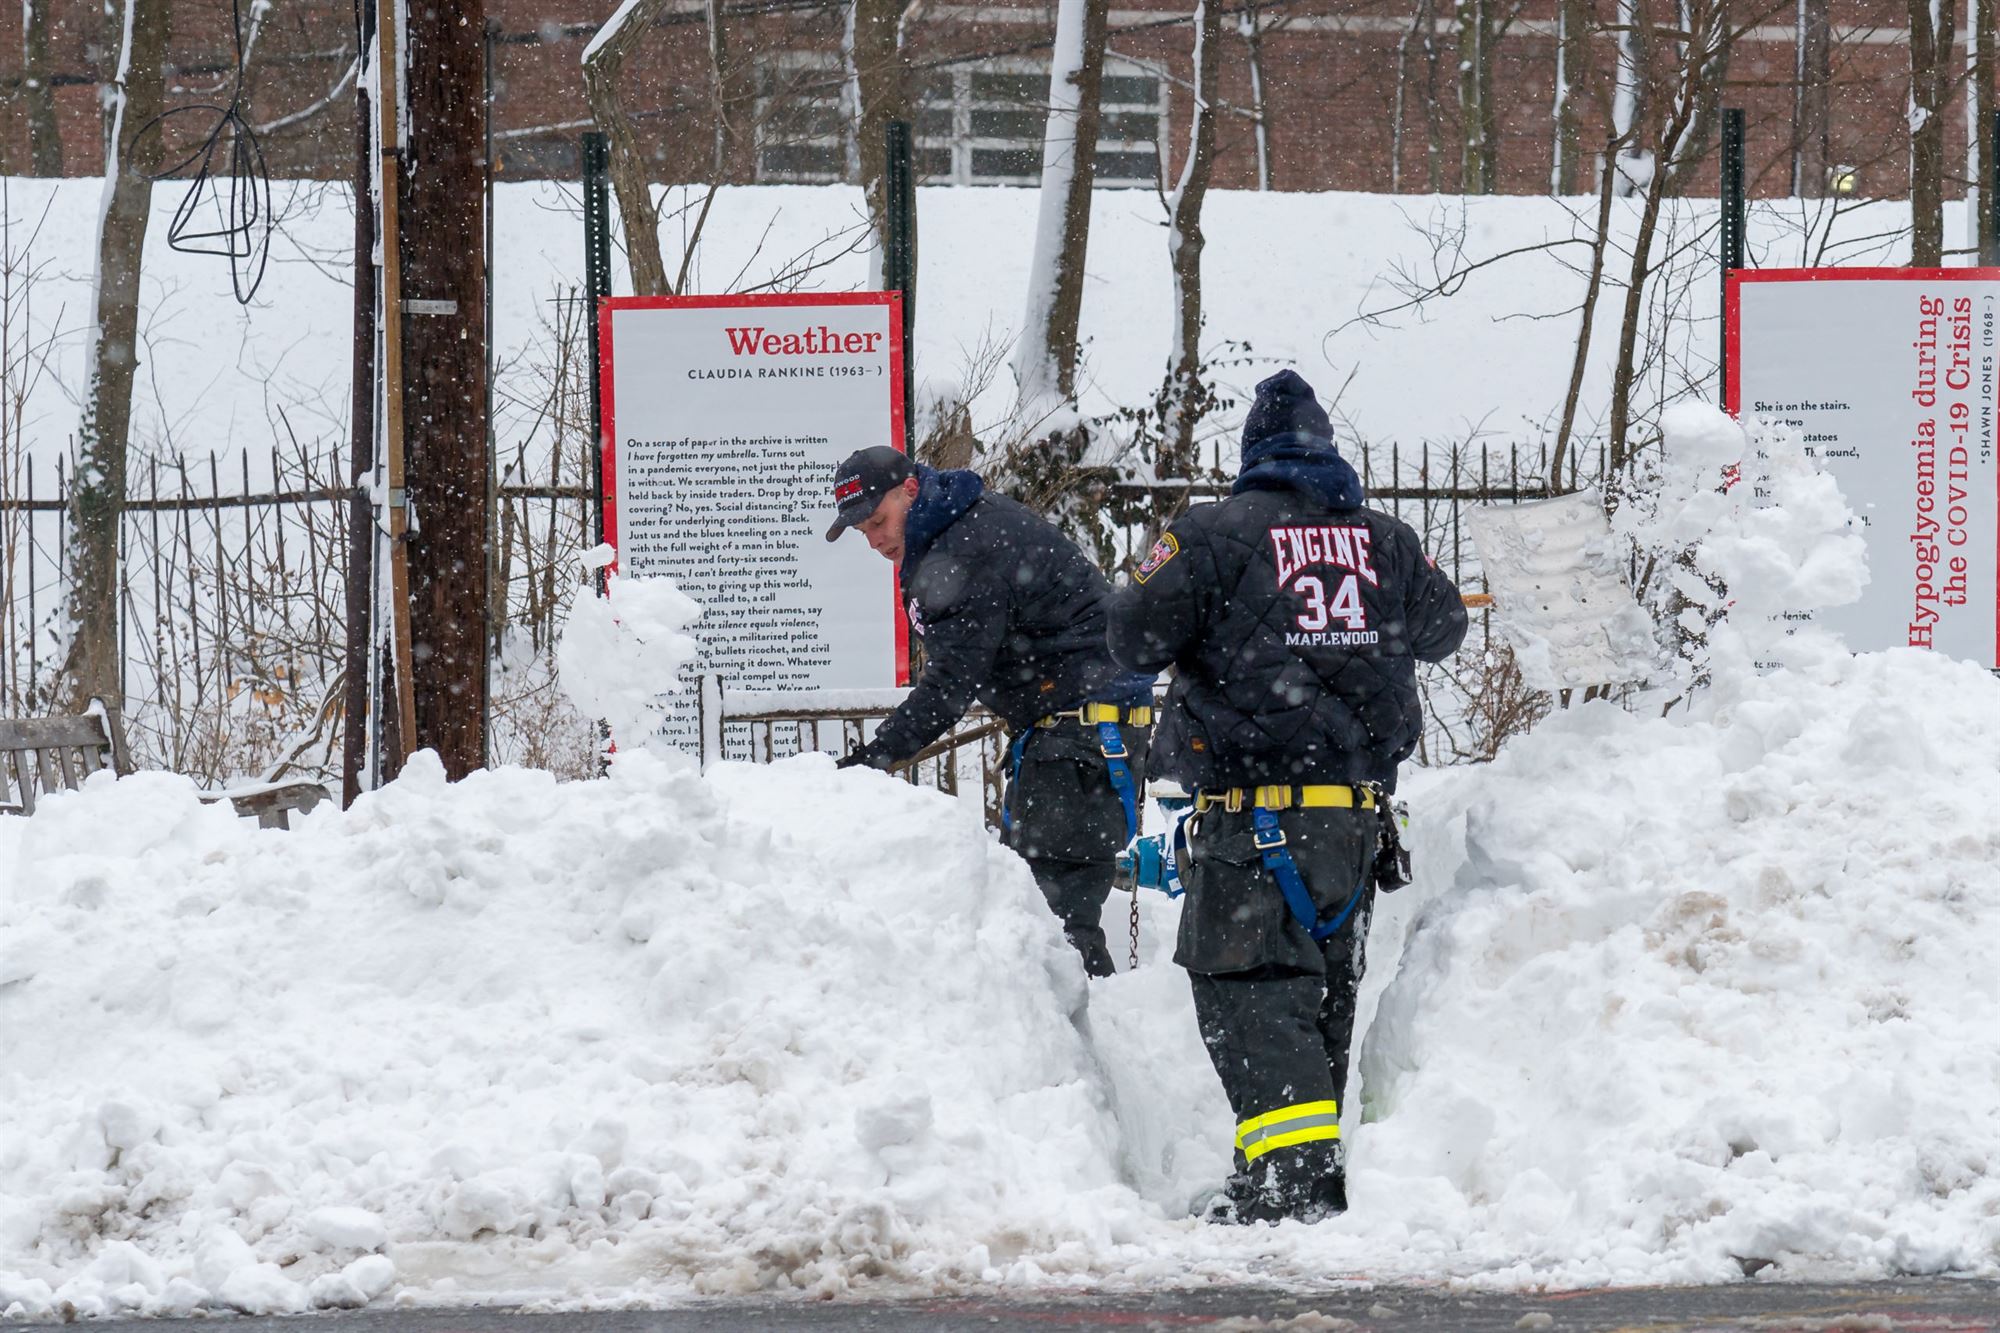 Firefighters shovel snow near sign with a poem